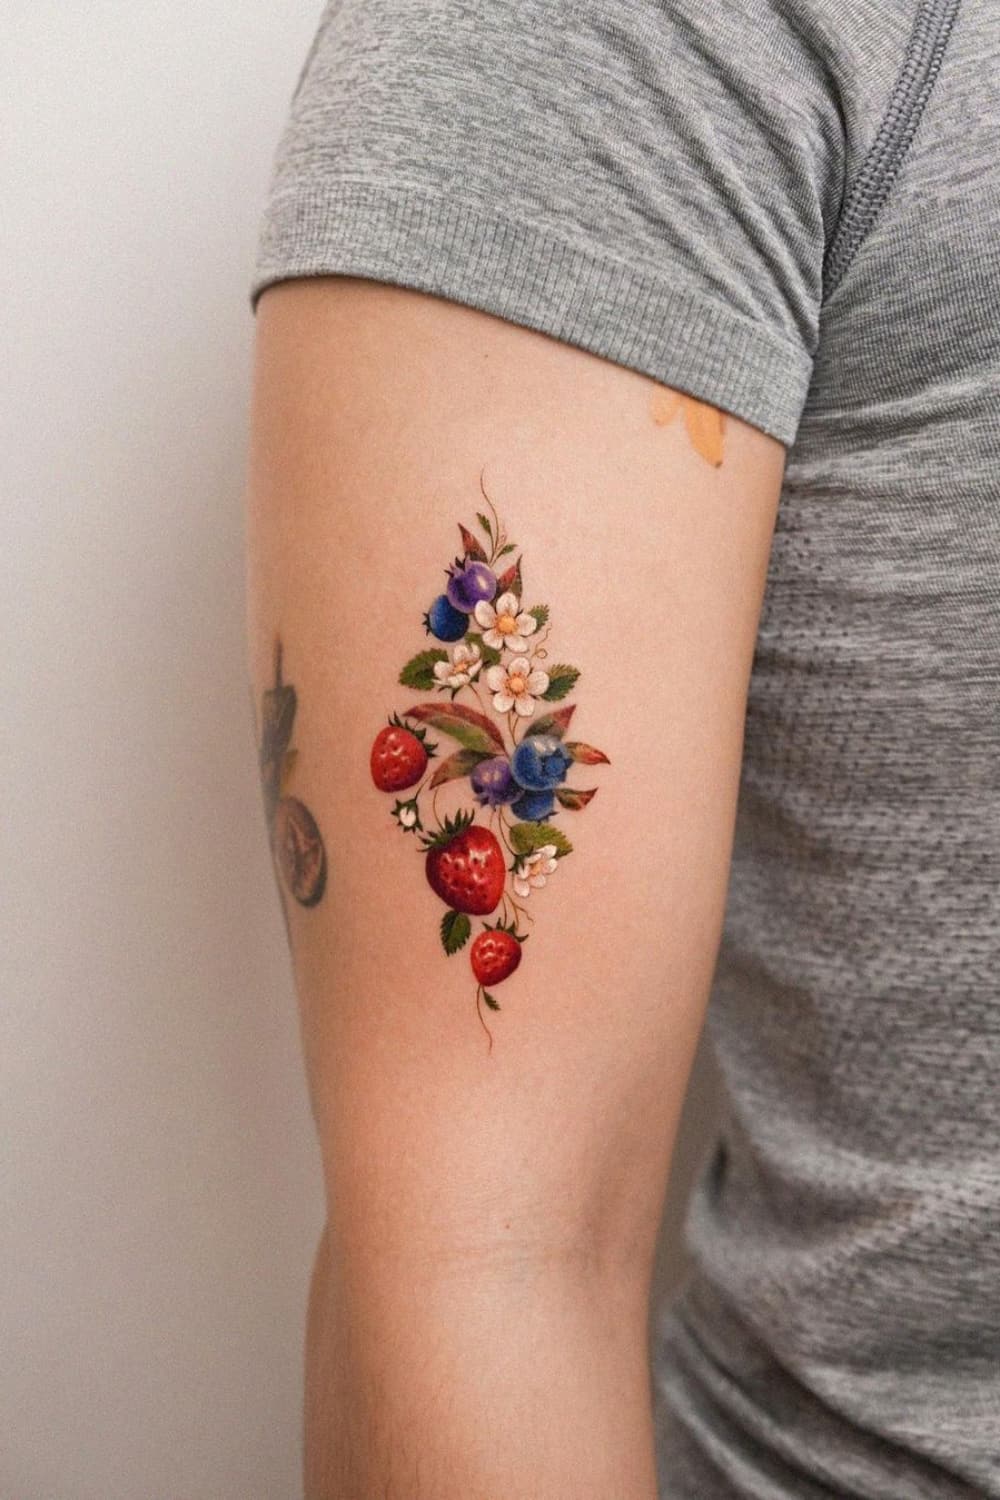 Strawberry Tattoo With Blueberries